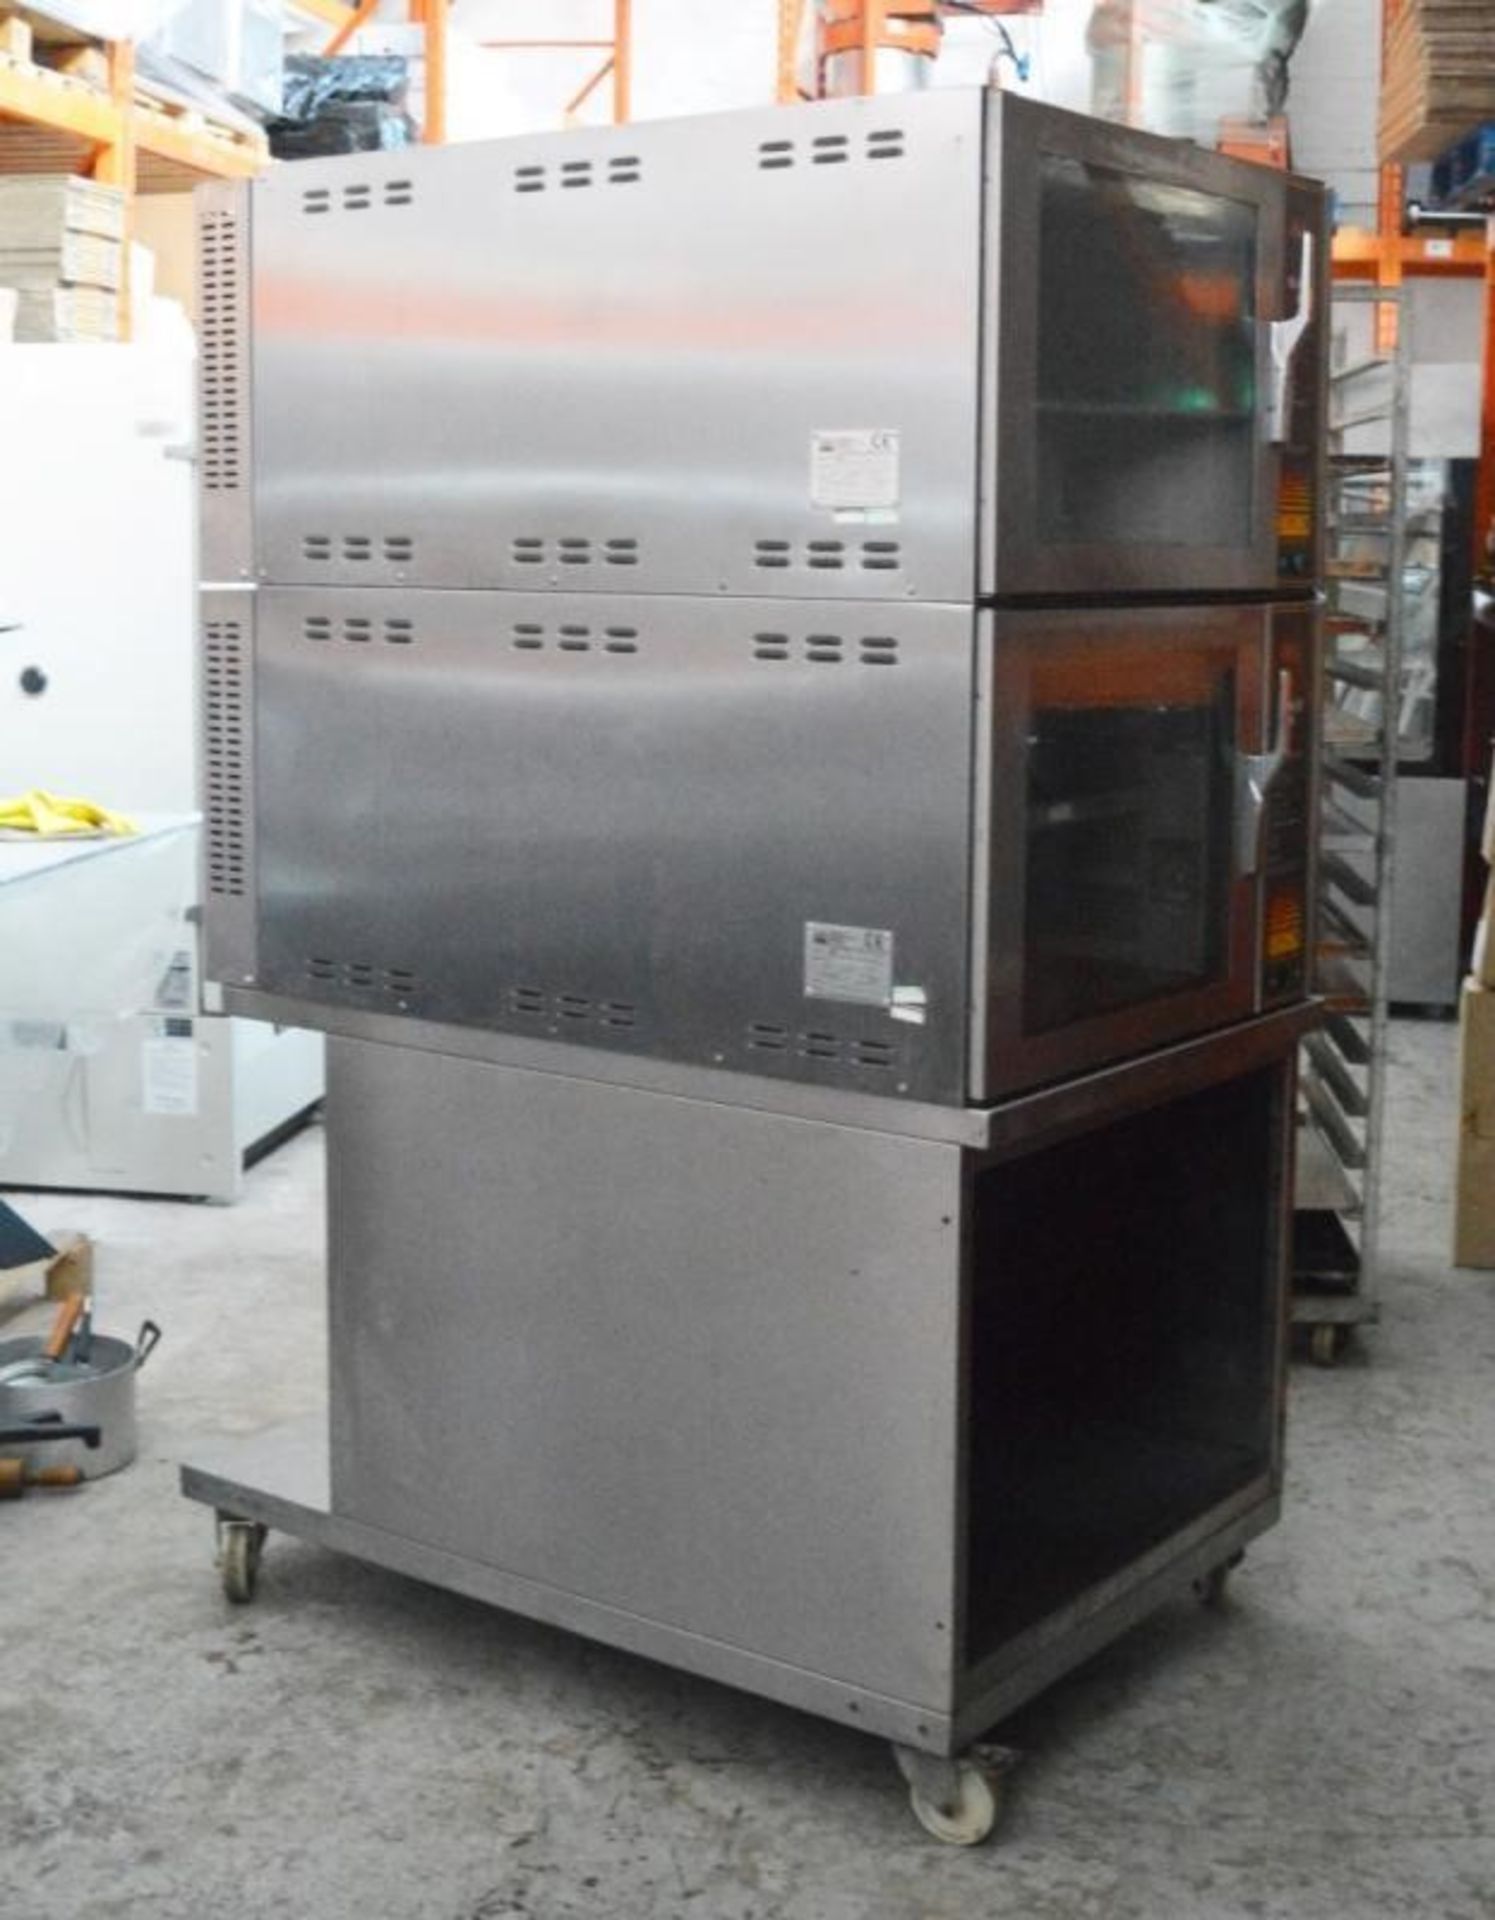 1 x Mono FG159 Double Bake Off Steam Convection Oven - Includes Ten Cooking Trays, Mobile Tray Holde - Bild 11 aus 14